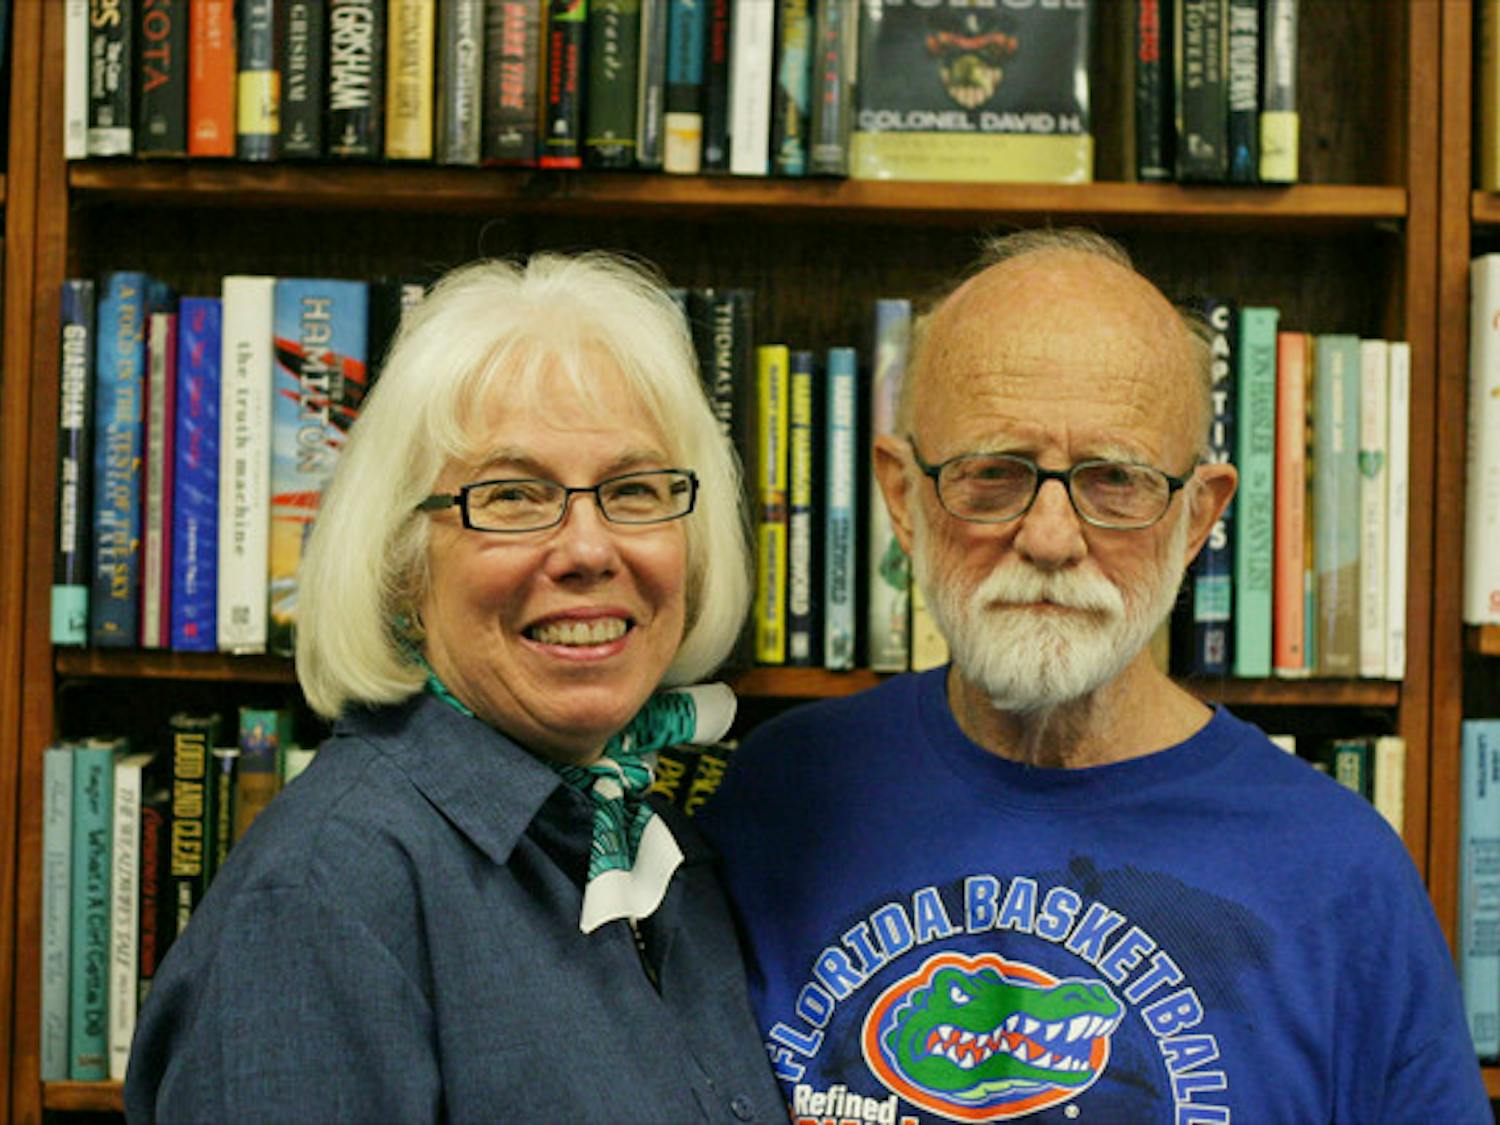 Book Lover's Cafe owners Anne Haisley, 71, and Phil Haisley, 77, pose for a photo Thursday. They have owned the Gainesville cafe, which will be closing its doors in January, since 1989.